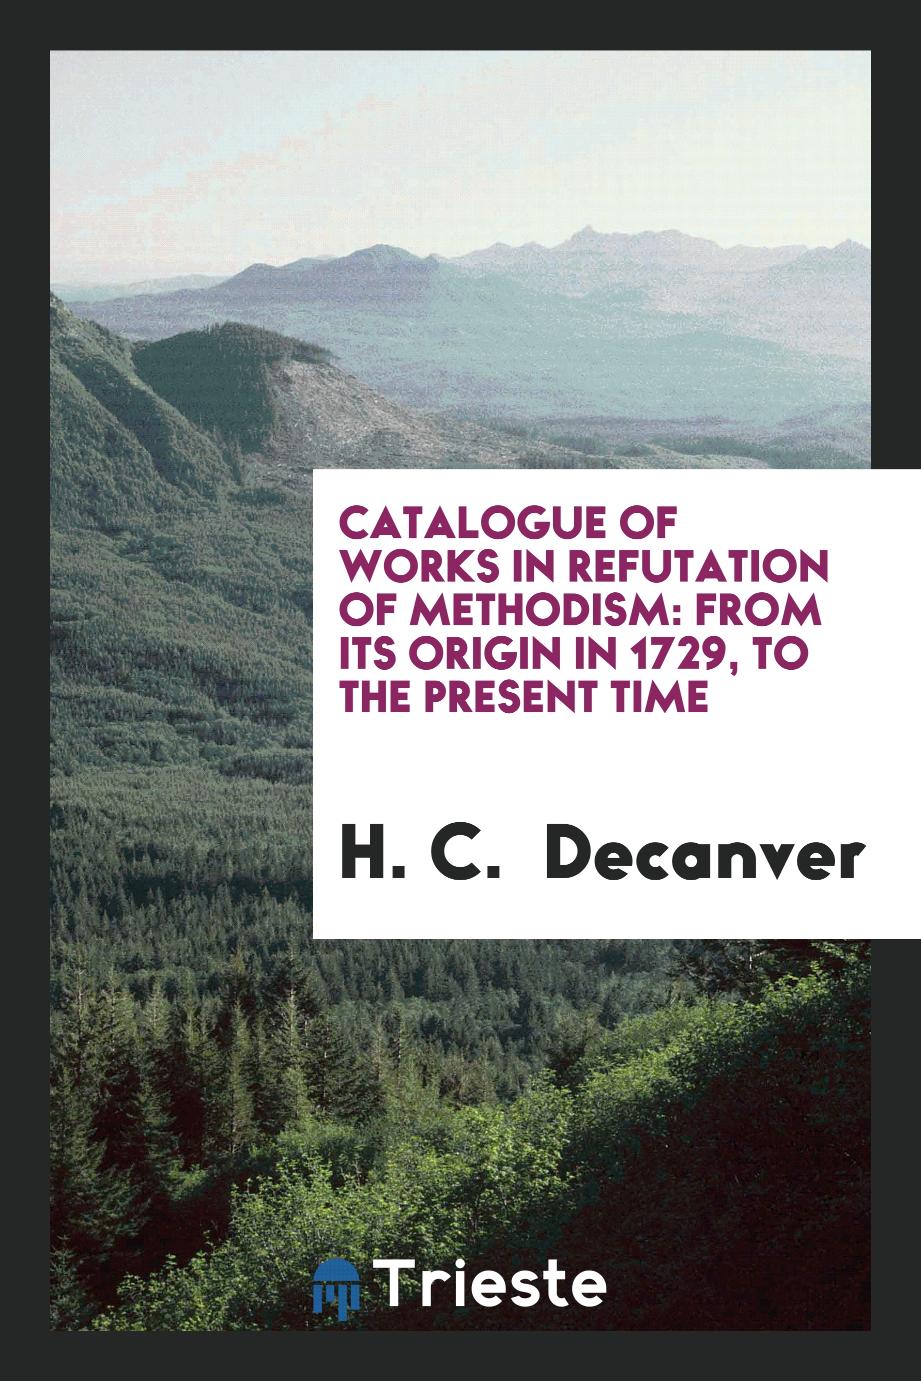 Catalogue of Works in Refutation of Methodism: From Its Origin in 1729, to the present time